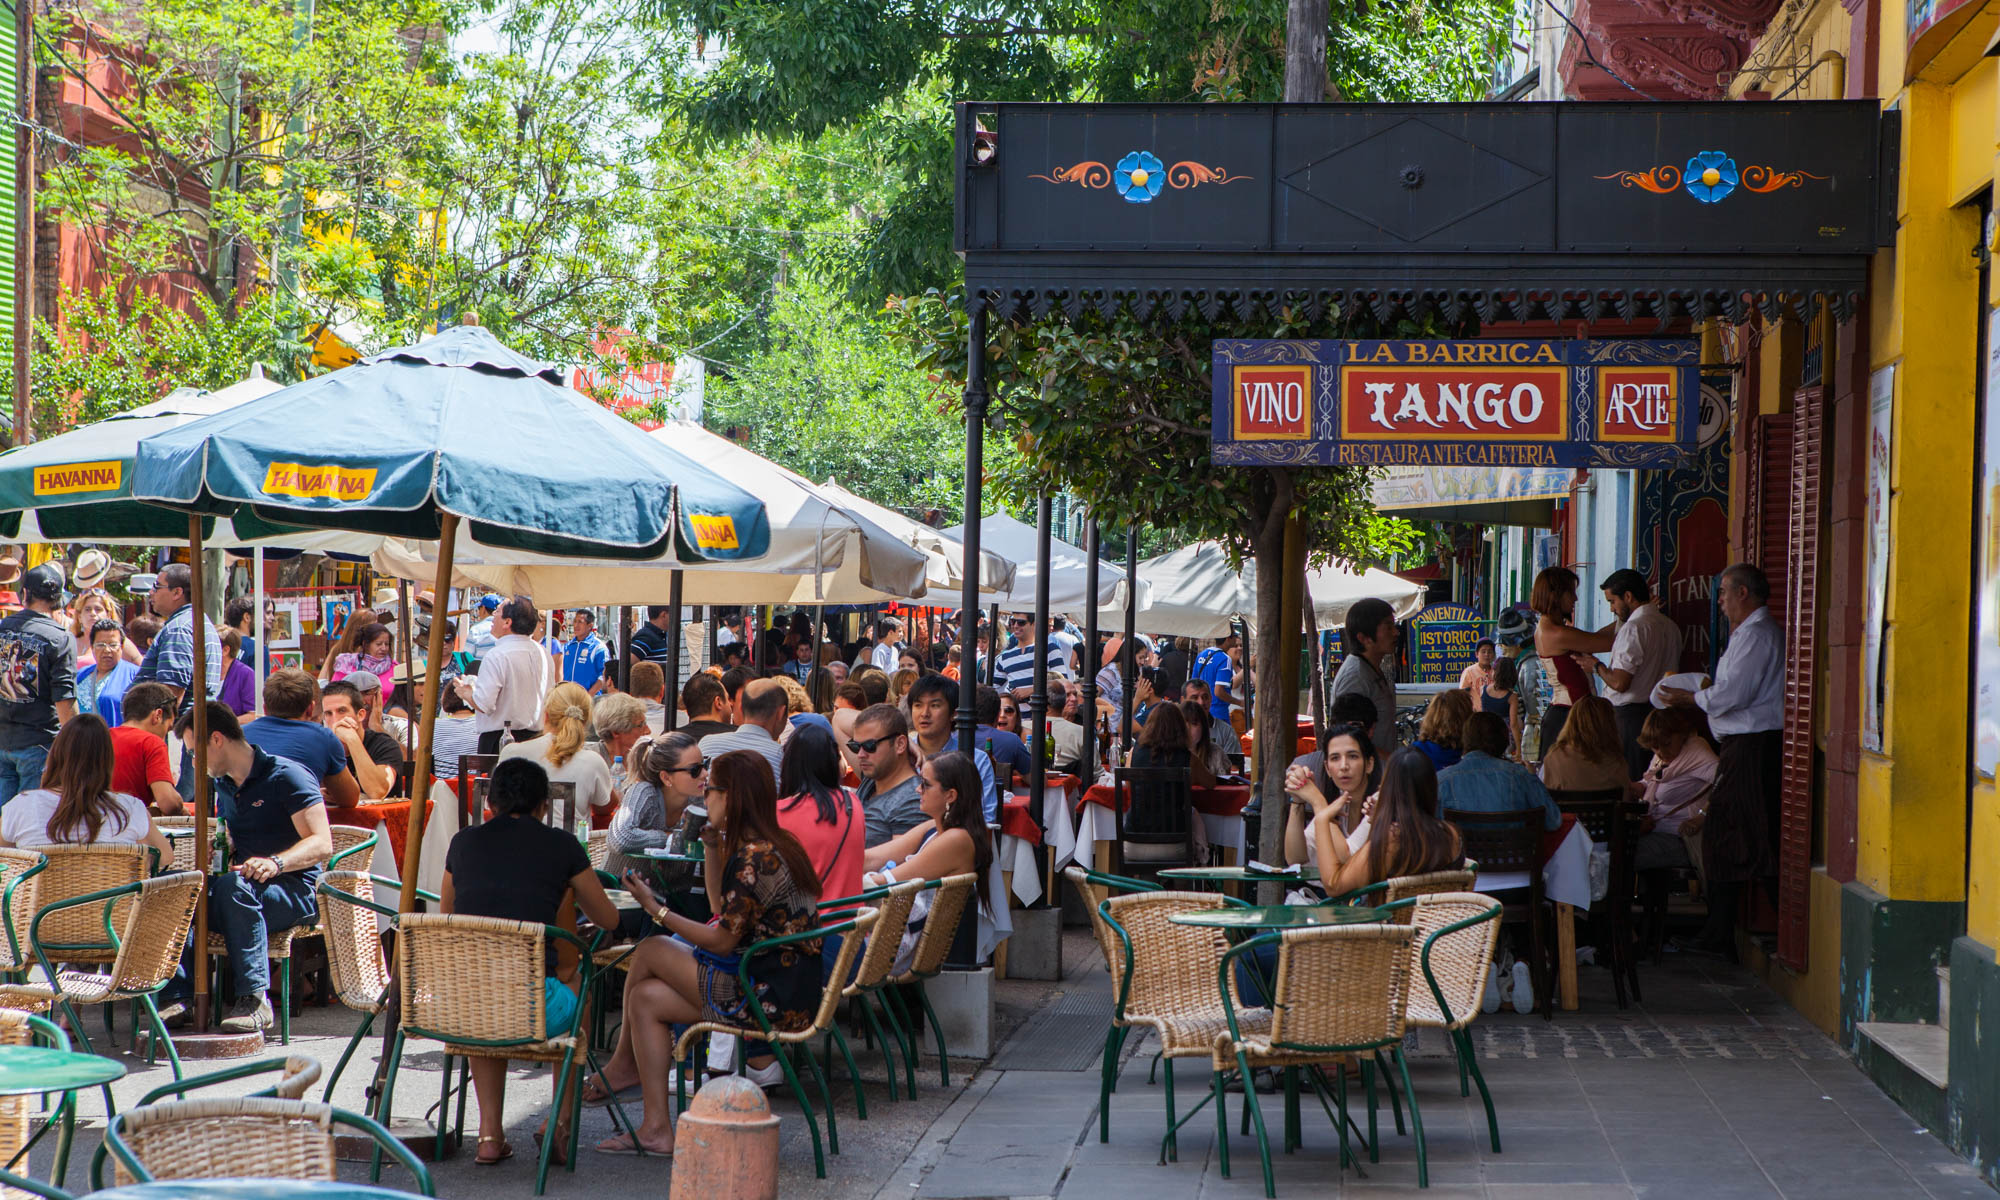 Busy street full of people and cafes in Buenos Aires with a Tango sign by the restaurant